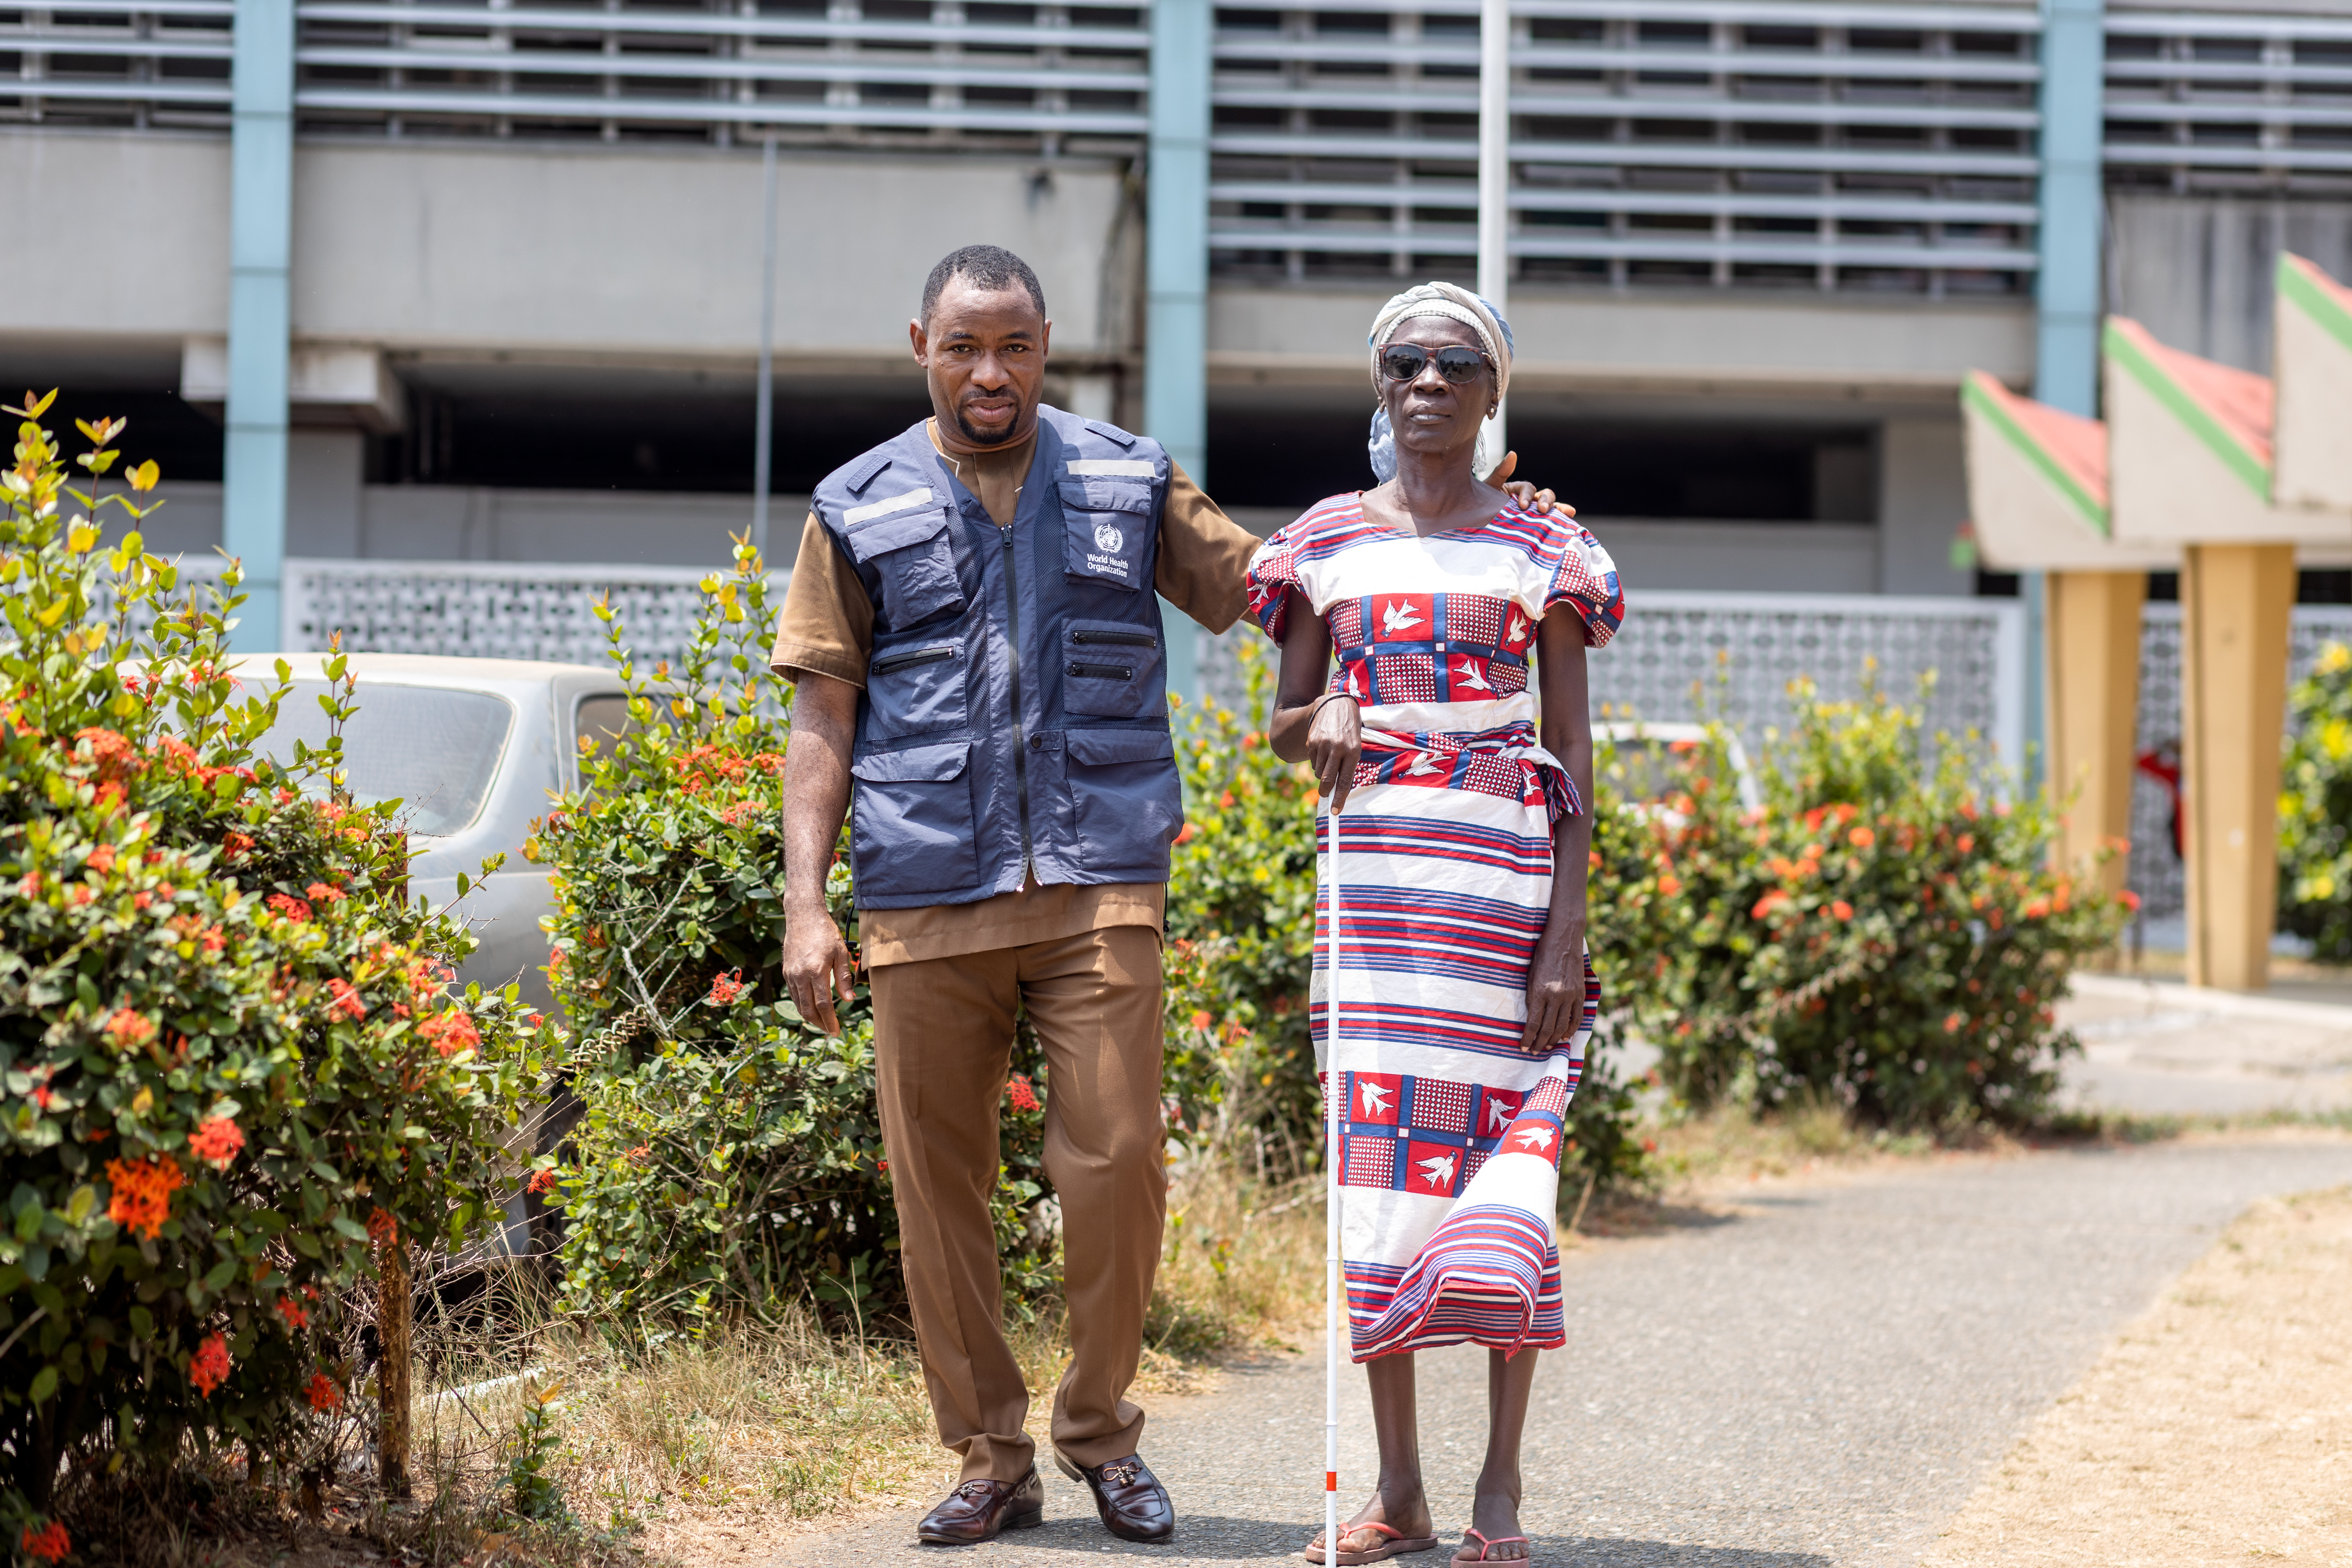 A beneficiary of WHO's donation standing with a WHO Staff after receiving her Cane